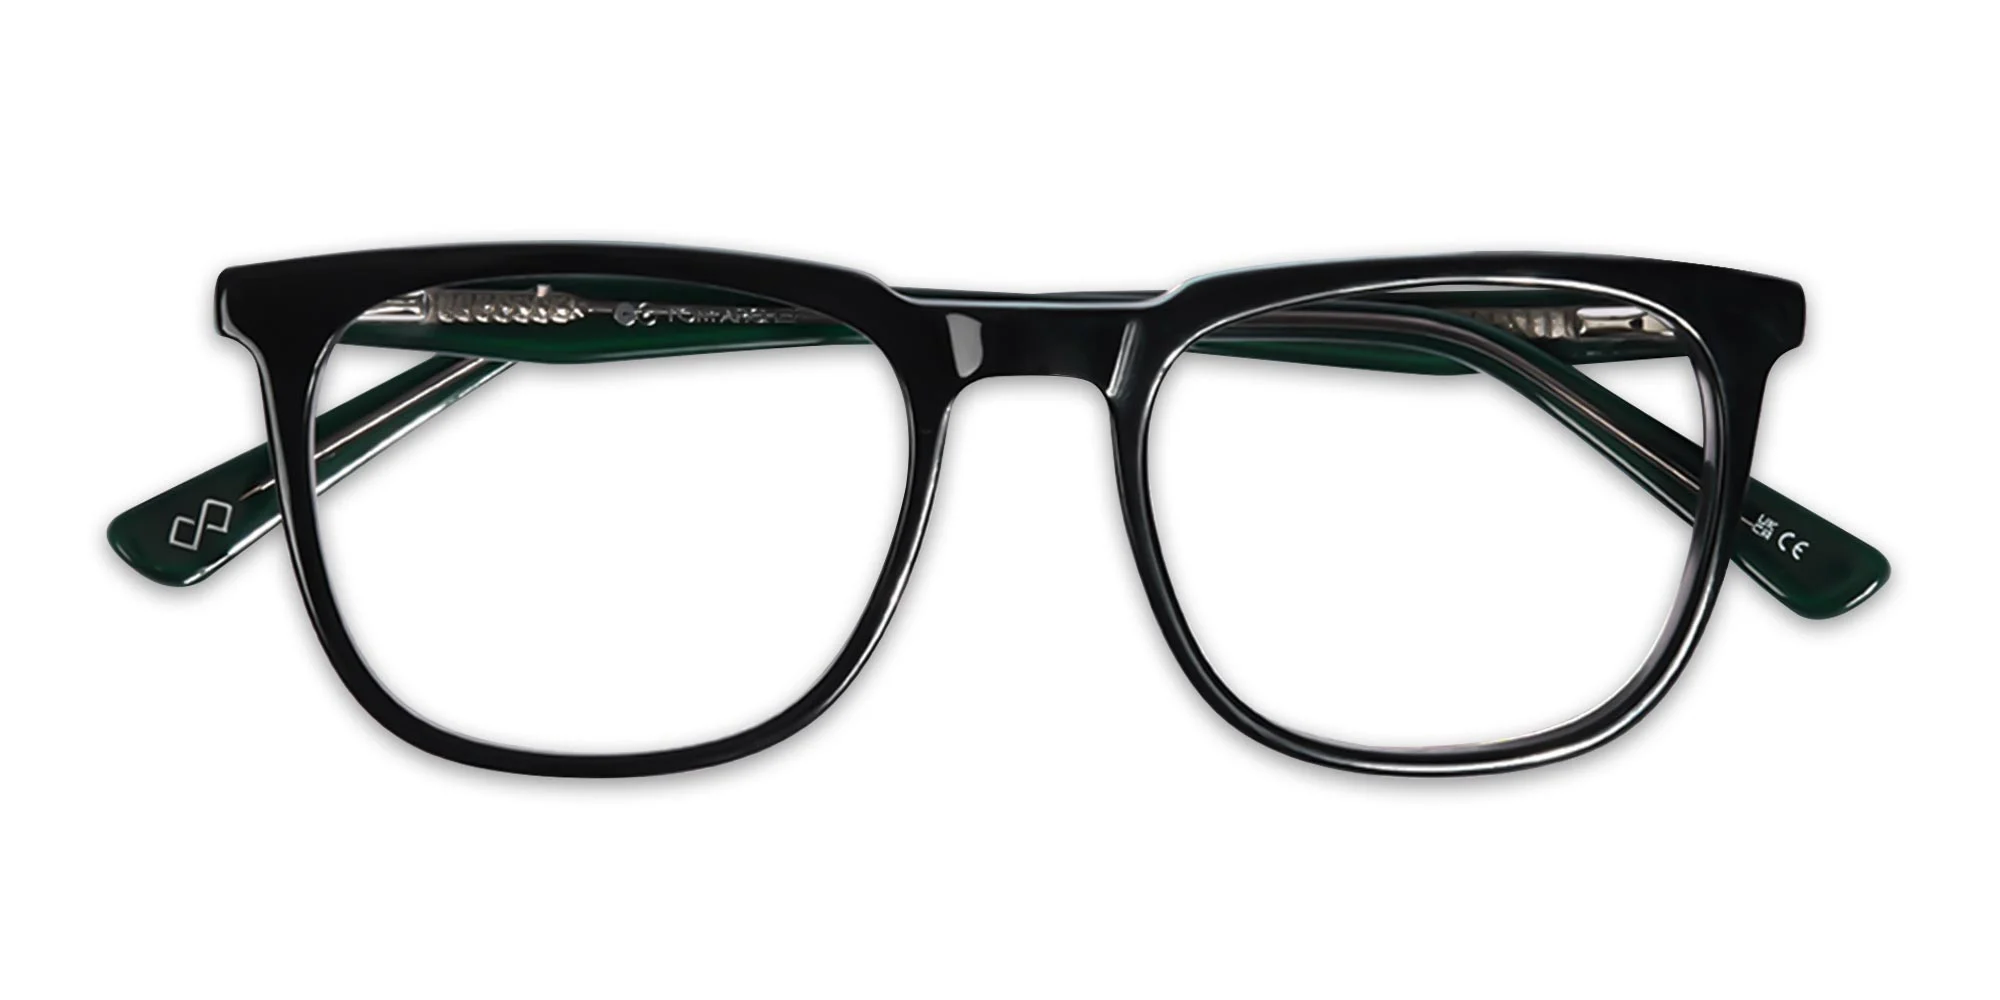 Black And Green Square Glasses-1